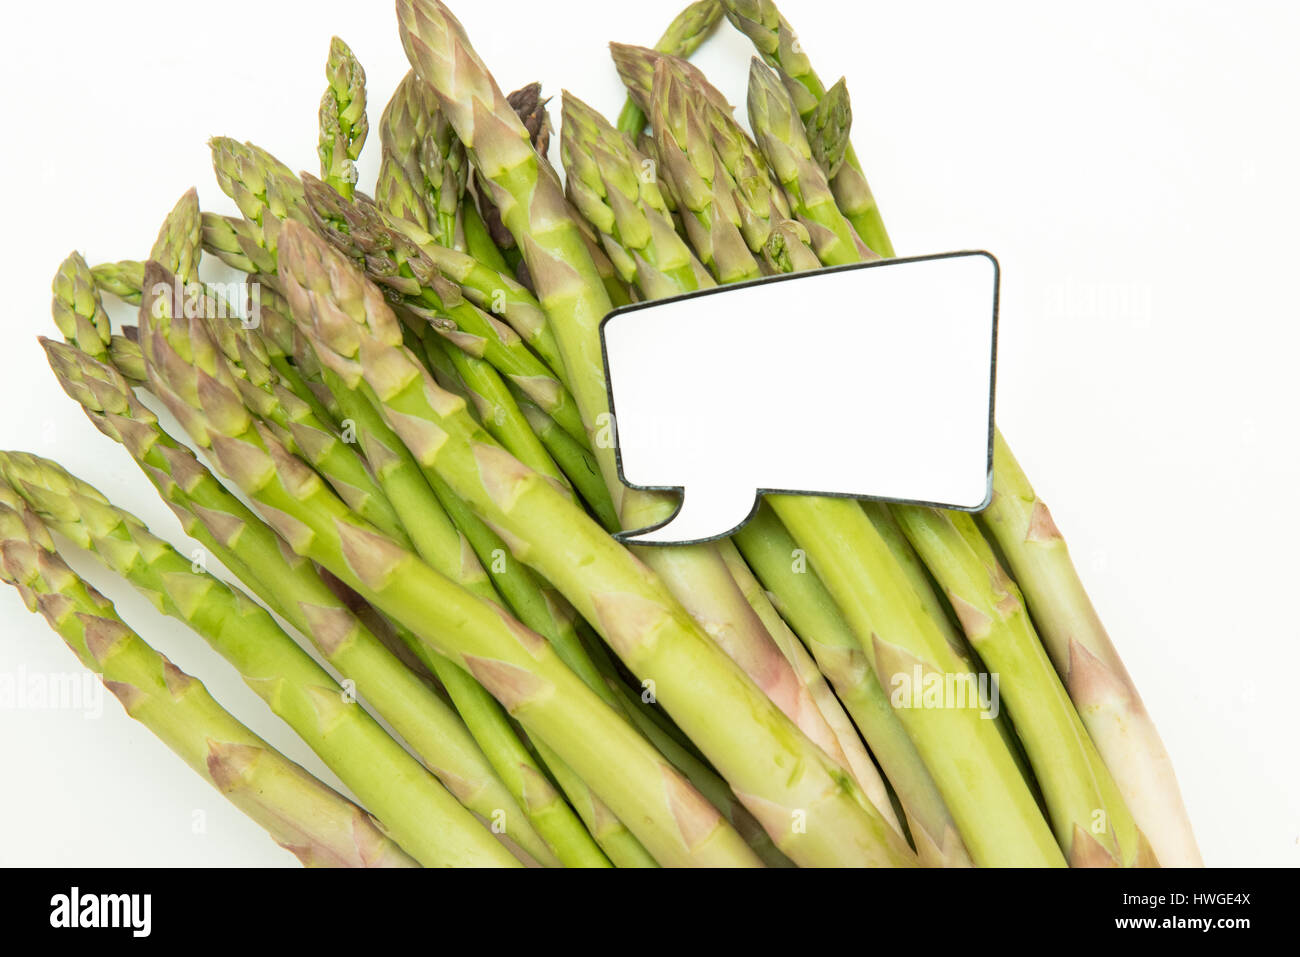 Bunch of fresh raw uncoocked asparagus and  funny comic style label for market price Stock Photo